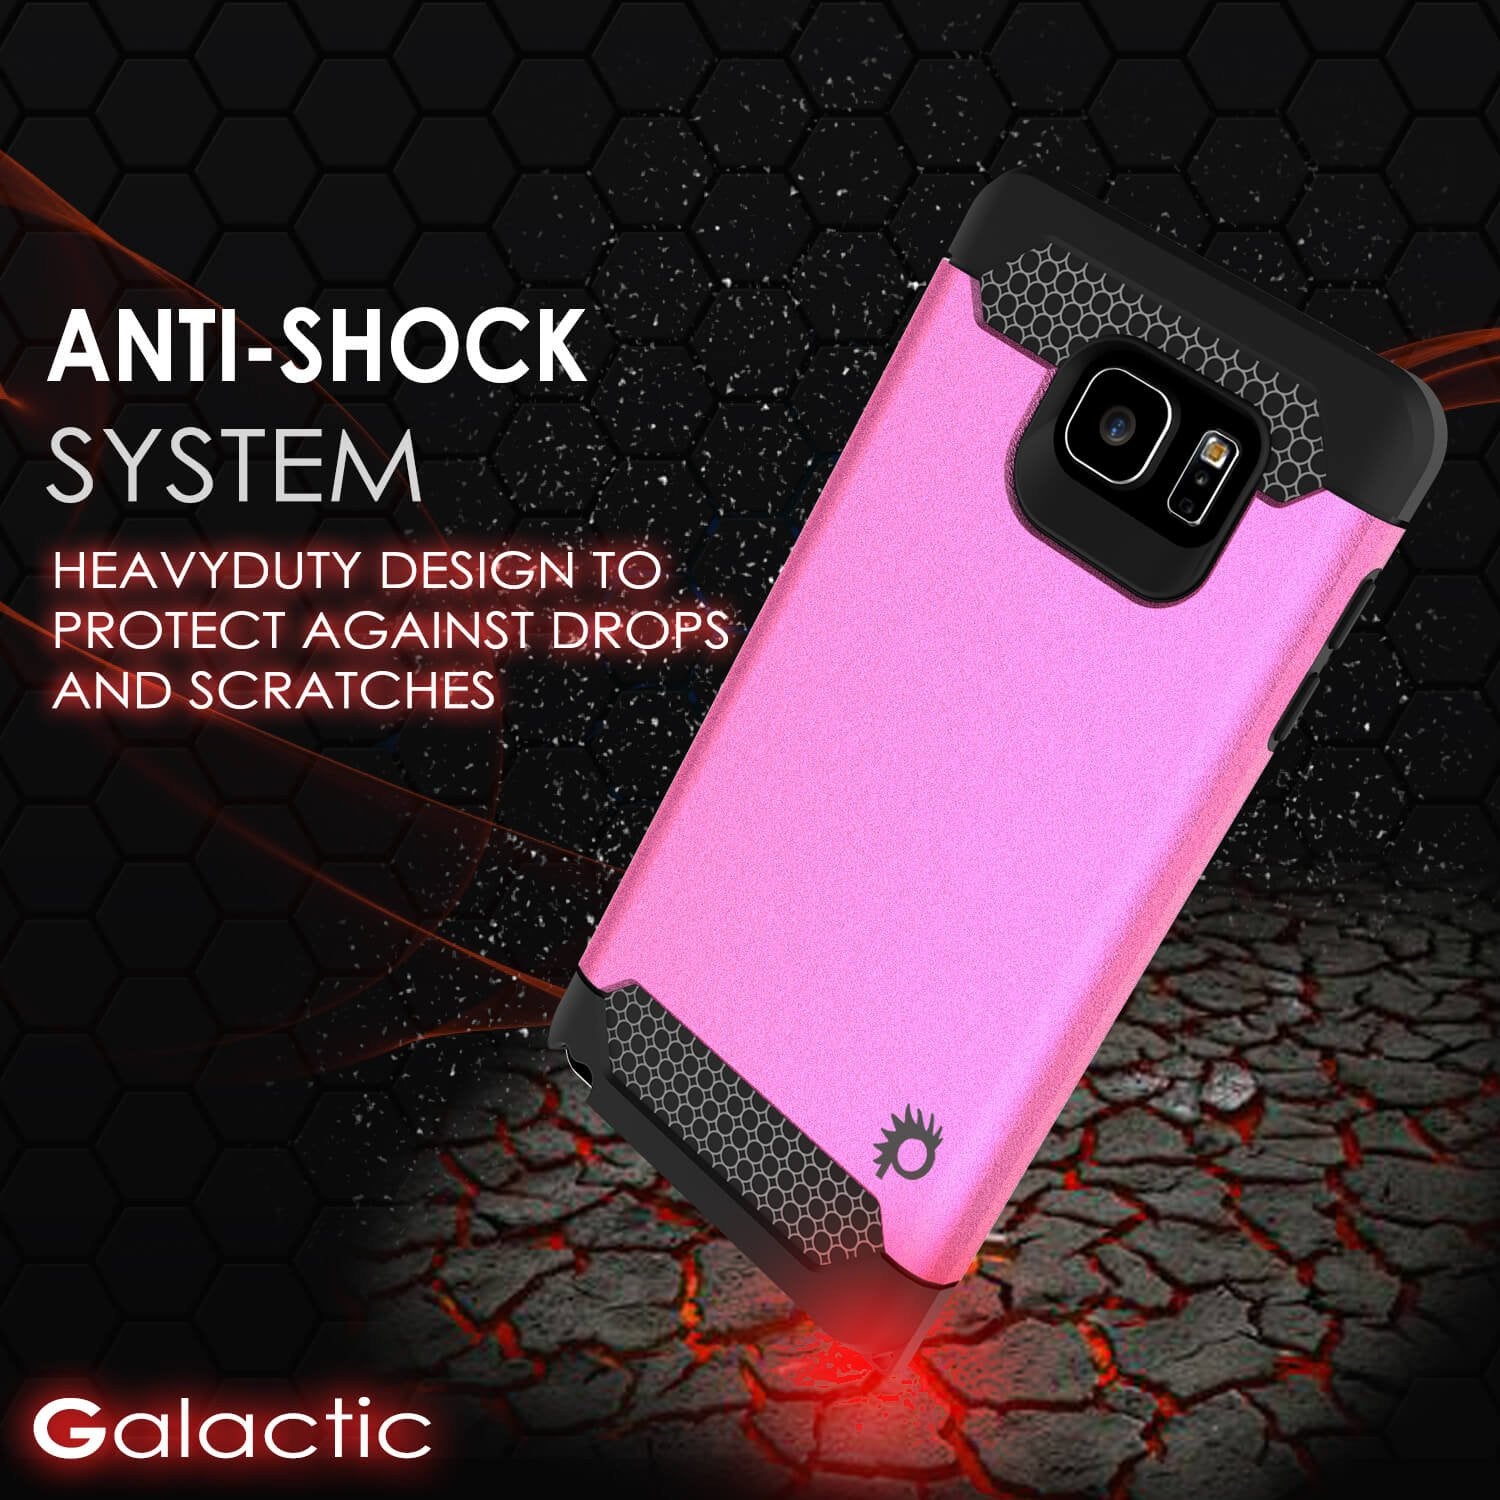 Galaxy Note 5 Case PunkCase Galactic Pink Series Slim Armor Soft Cover Case w/ Tempered Glass - PunkCase NZ